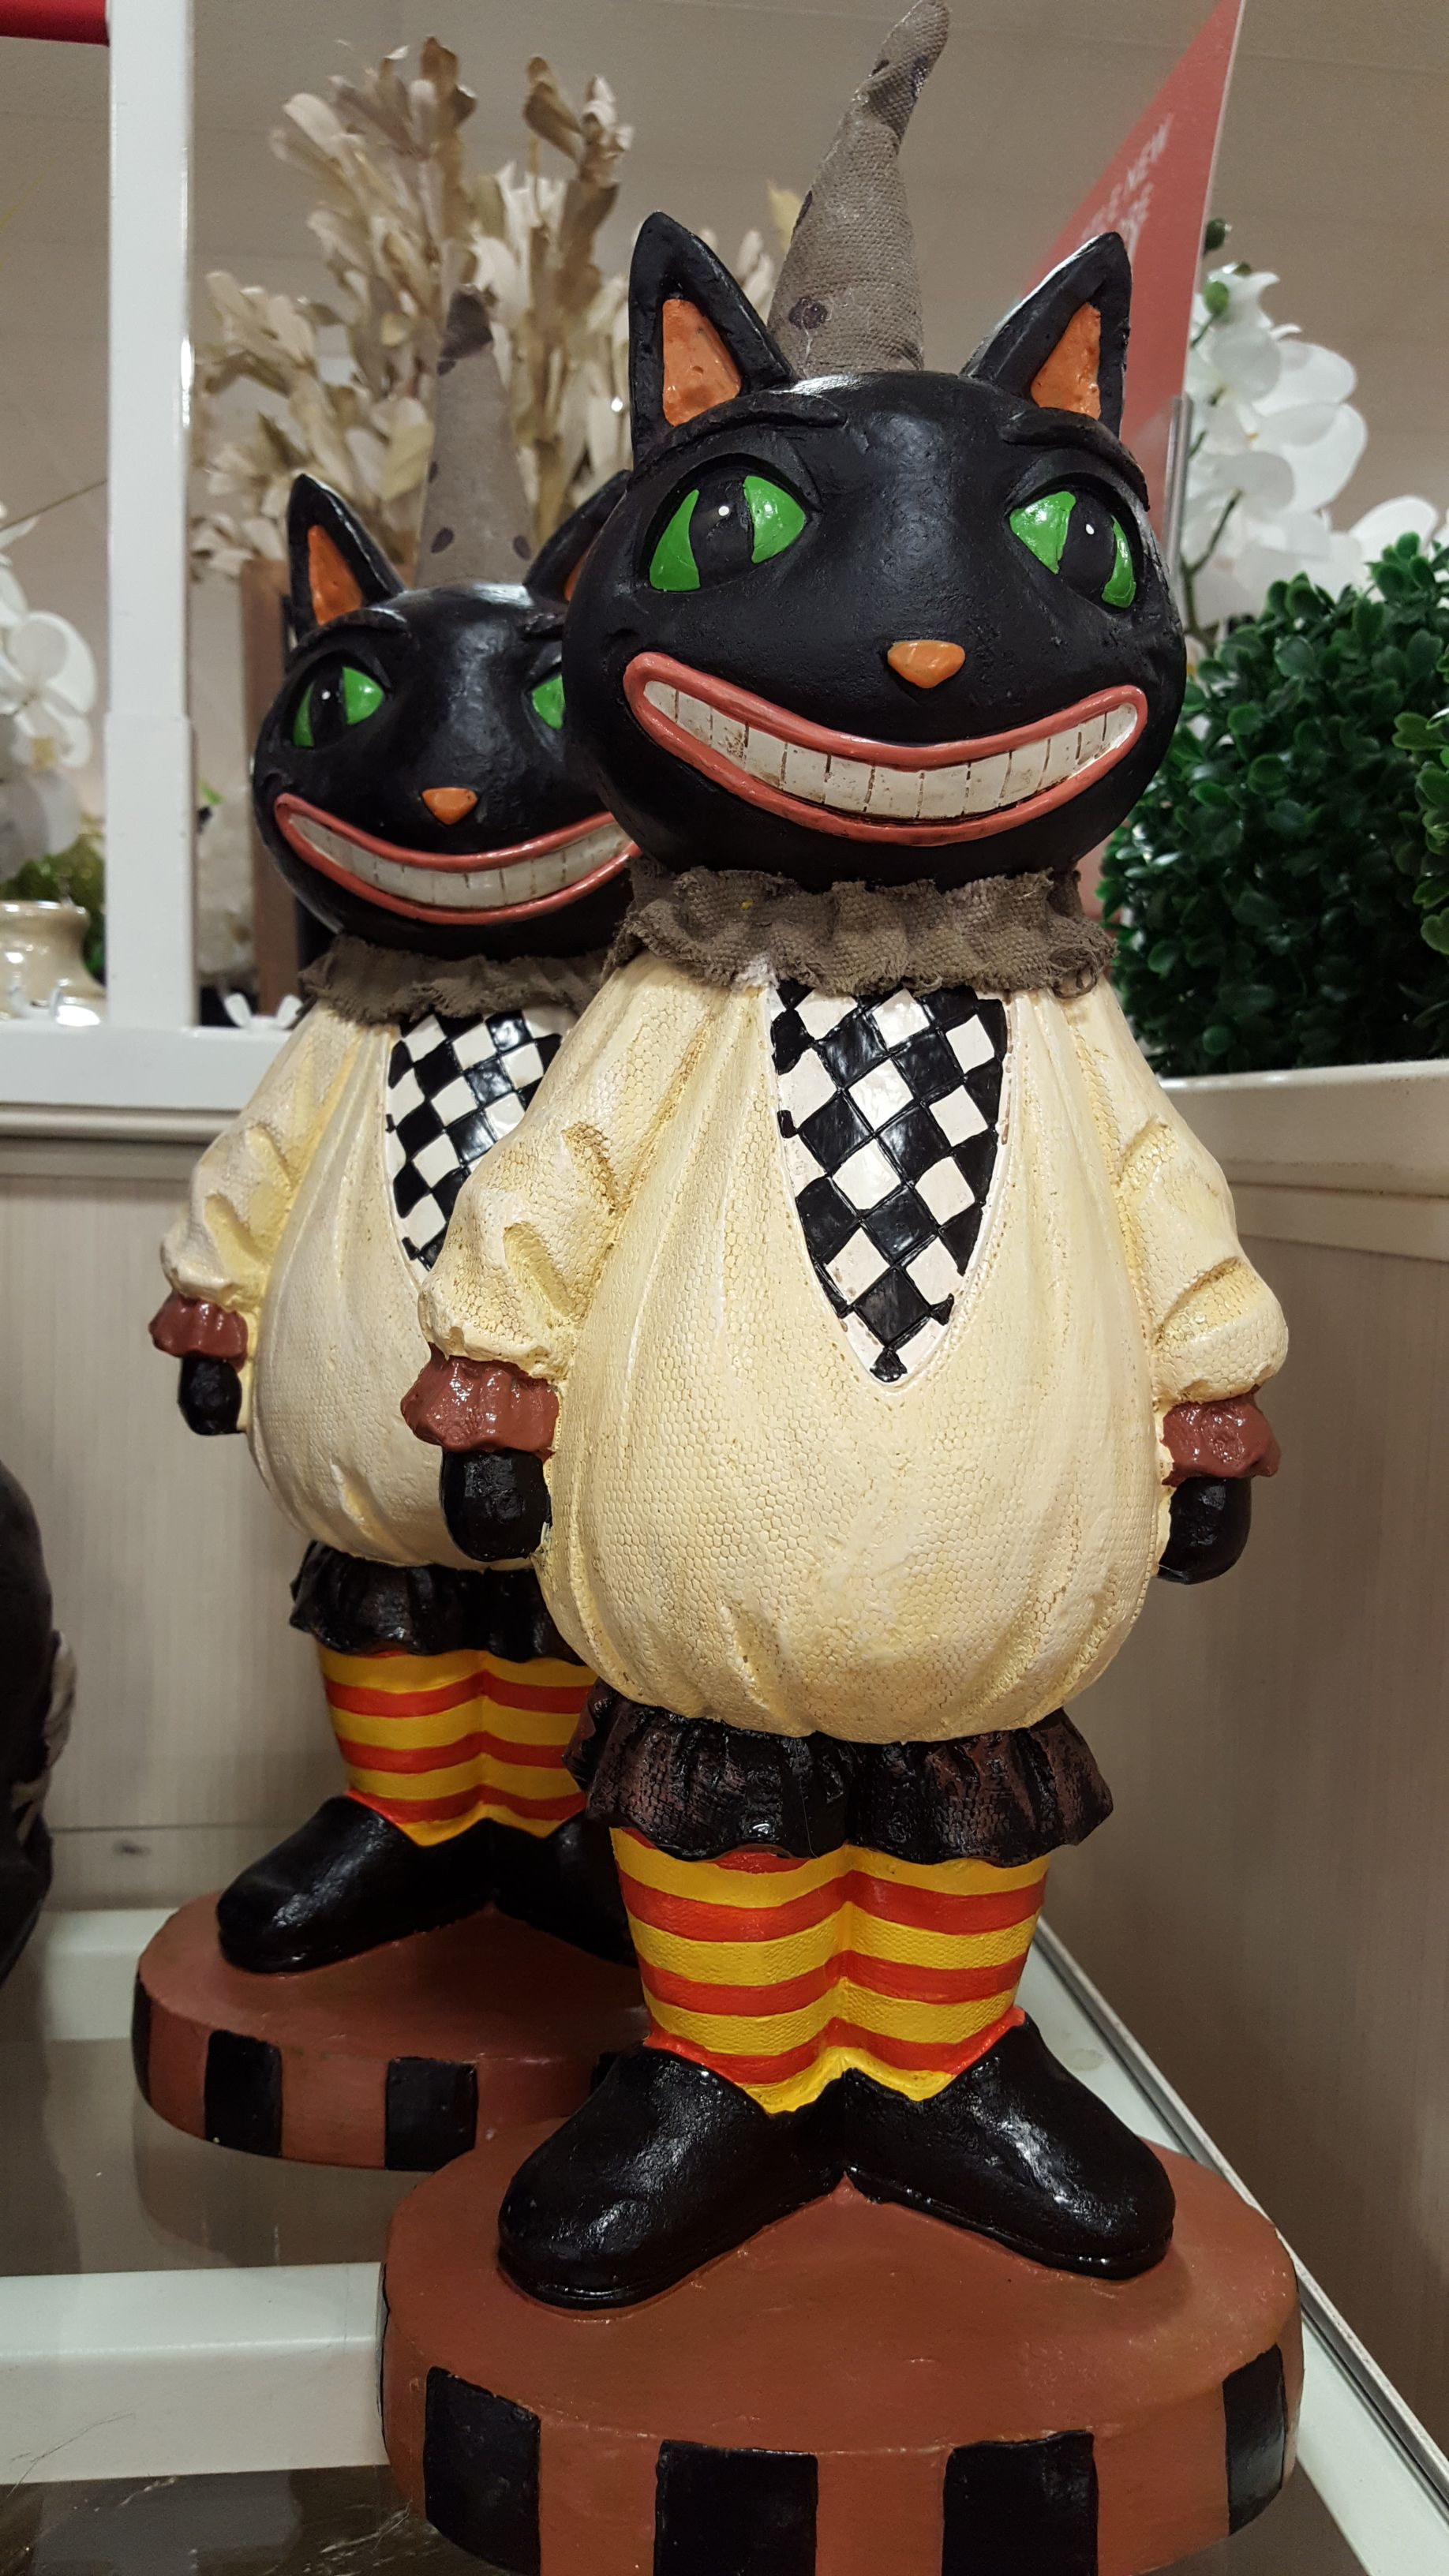 Home Goods Halloween Decor
 These well dressed vintage inspired cats are part of the